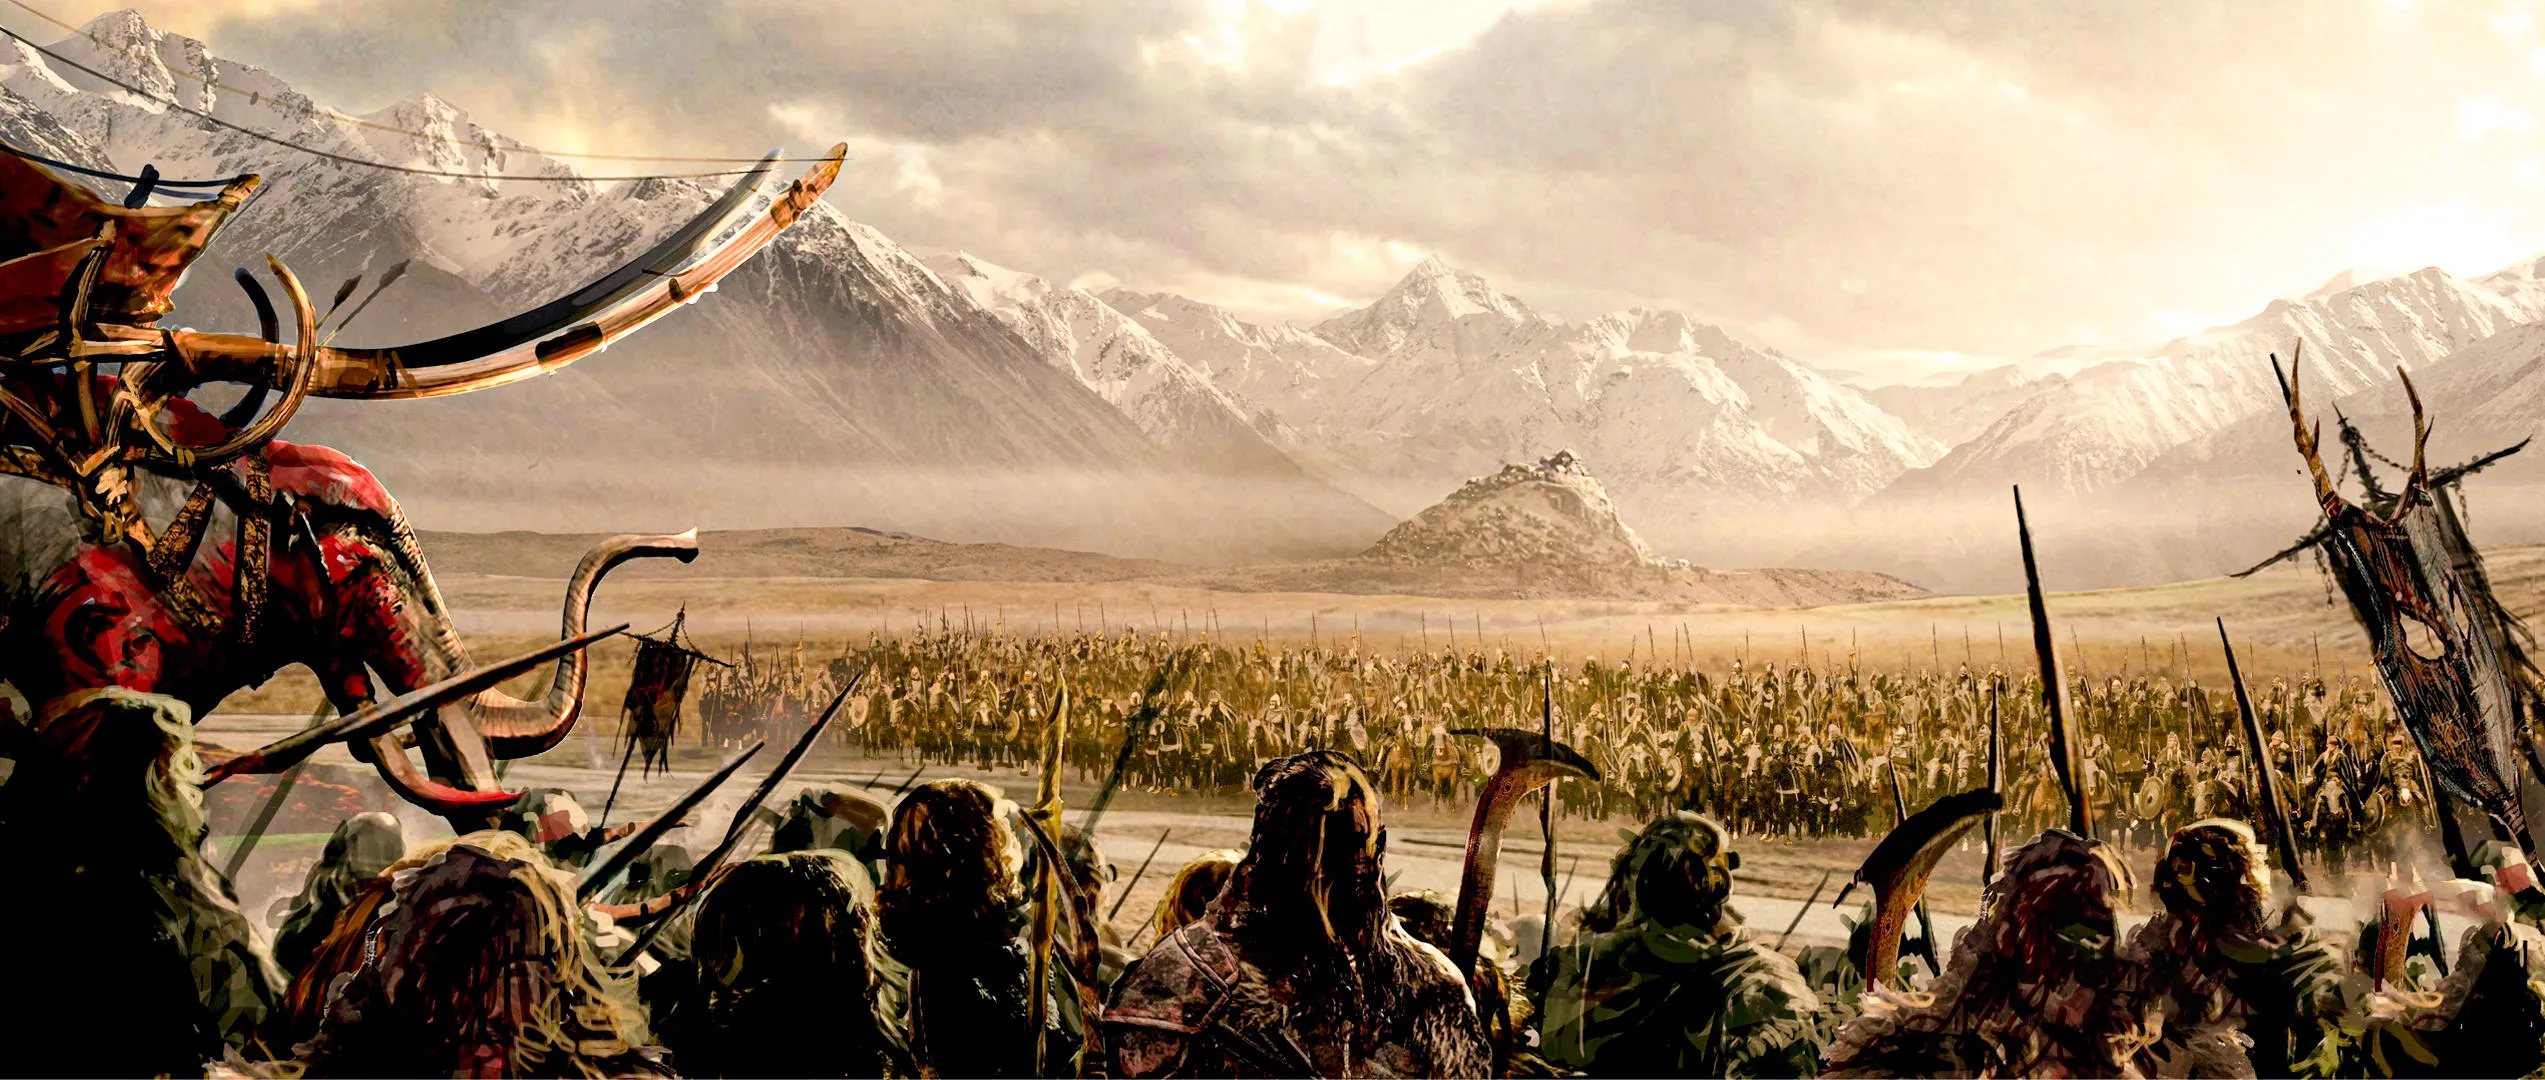 Lord of the Rings, The war of the Rohirrim